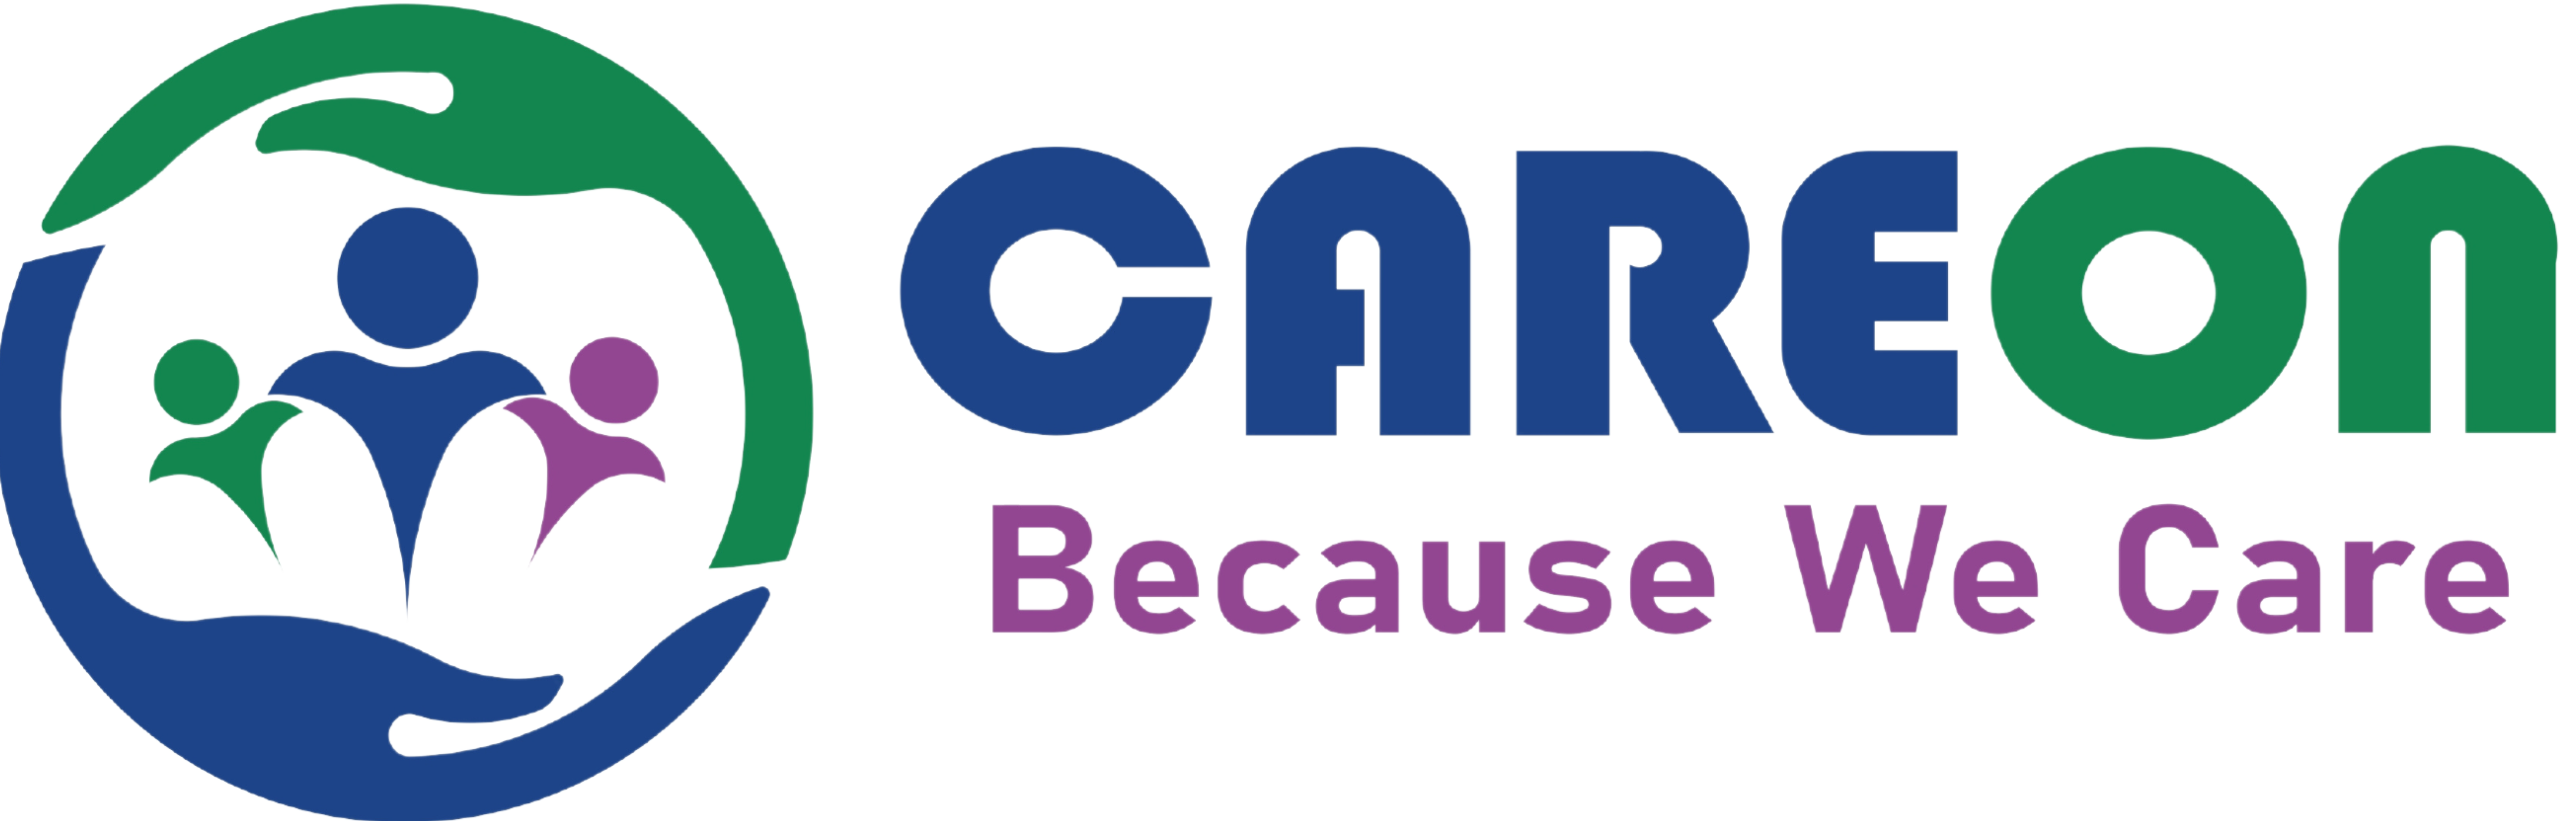 Careon Services – Because We Care